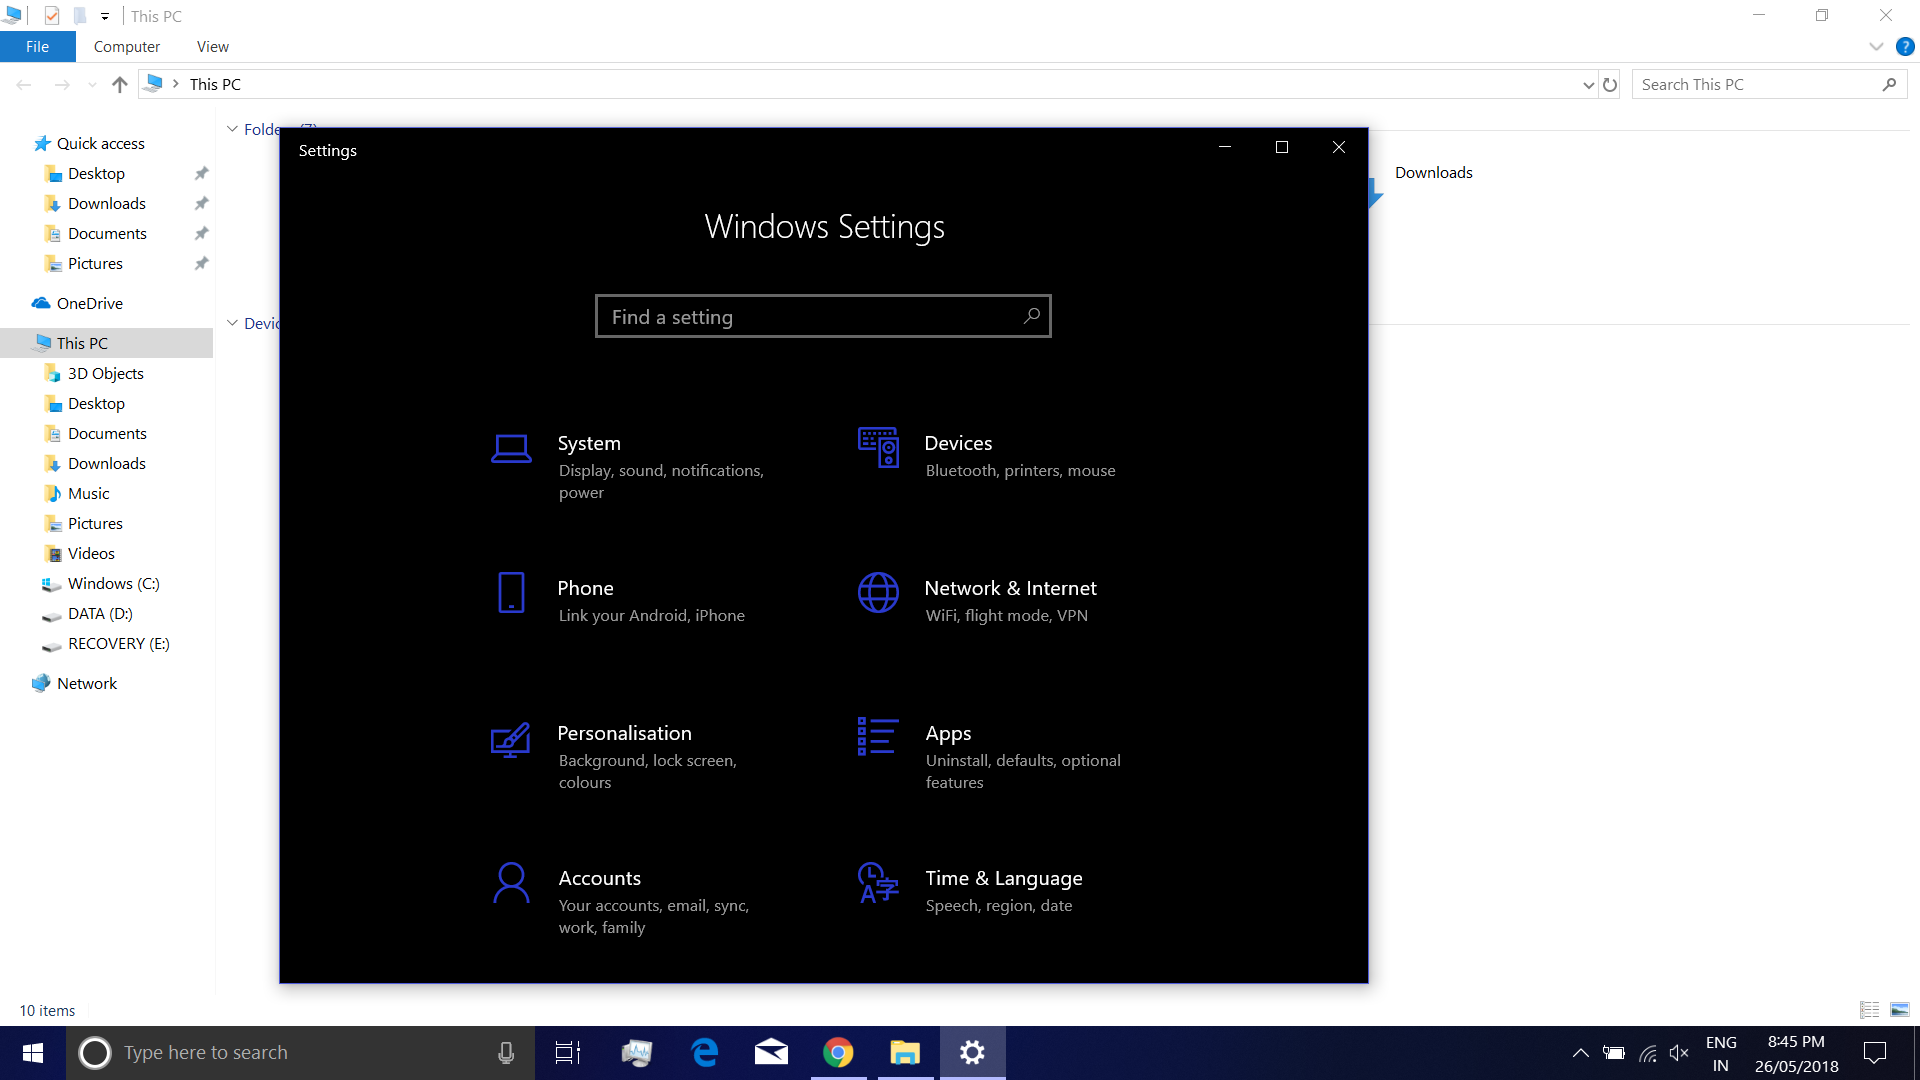 is it possible to enable dark theme for only windows 10 apps? e15e3eb3-c84d-47aa-ab91-5032851e84d6?upload=true.png